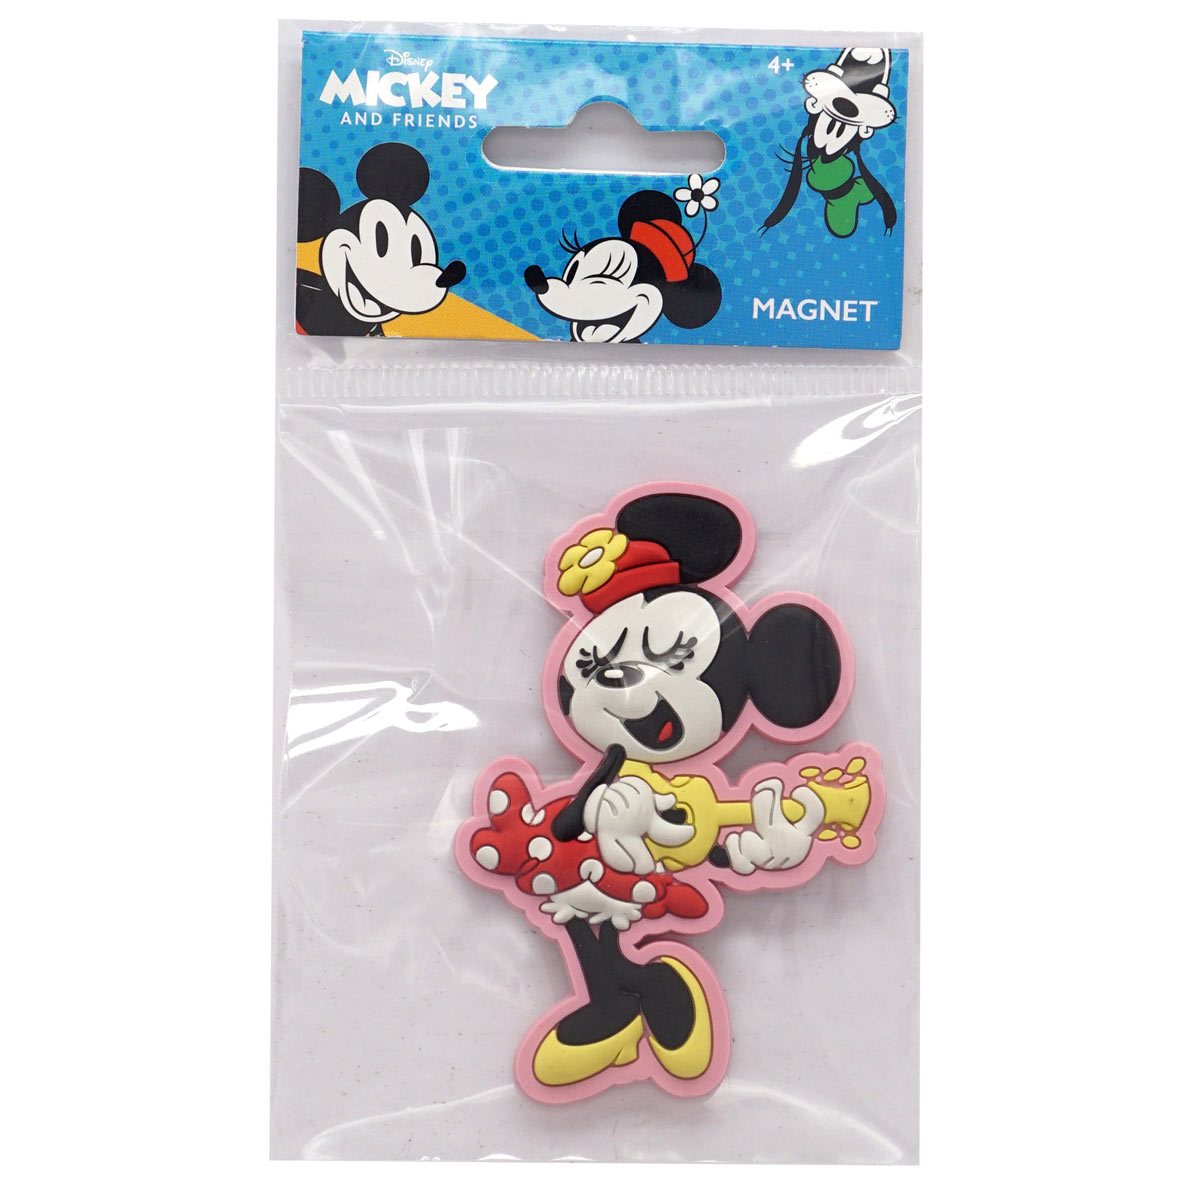 Minnie Mouse Singing Soft Touch Magnet - Entertainment Earth